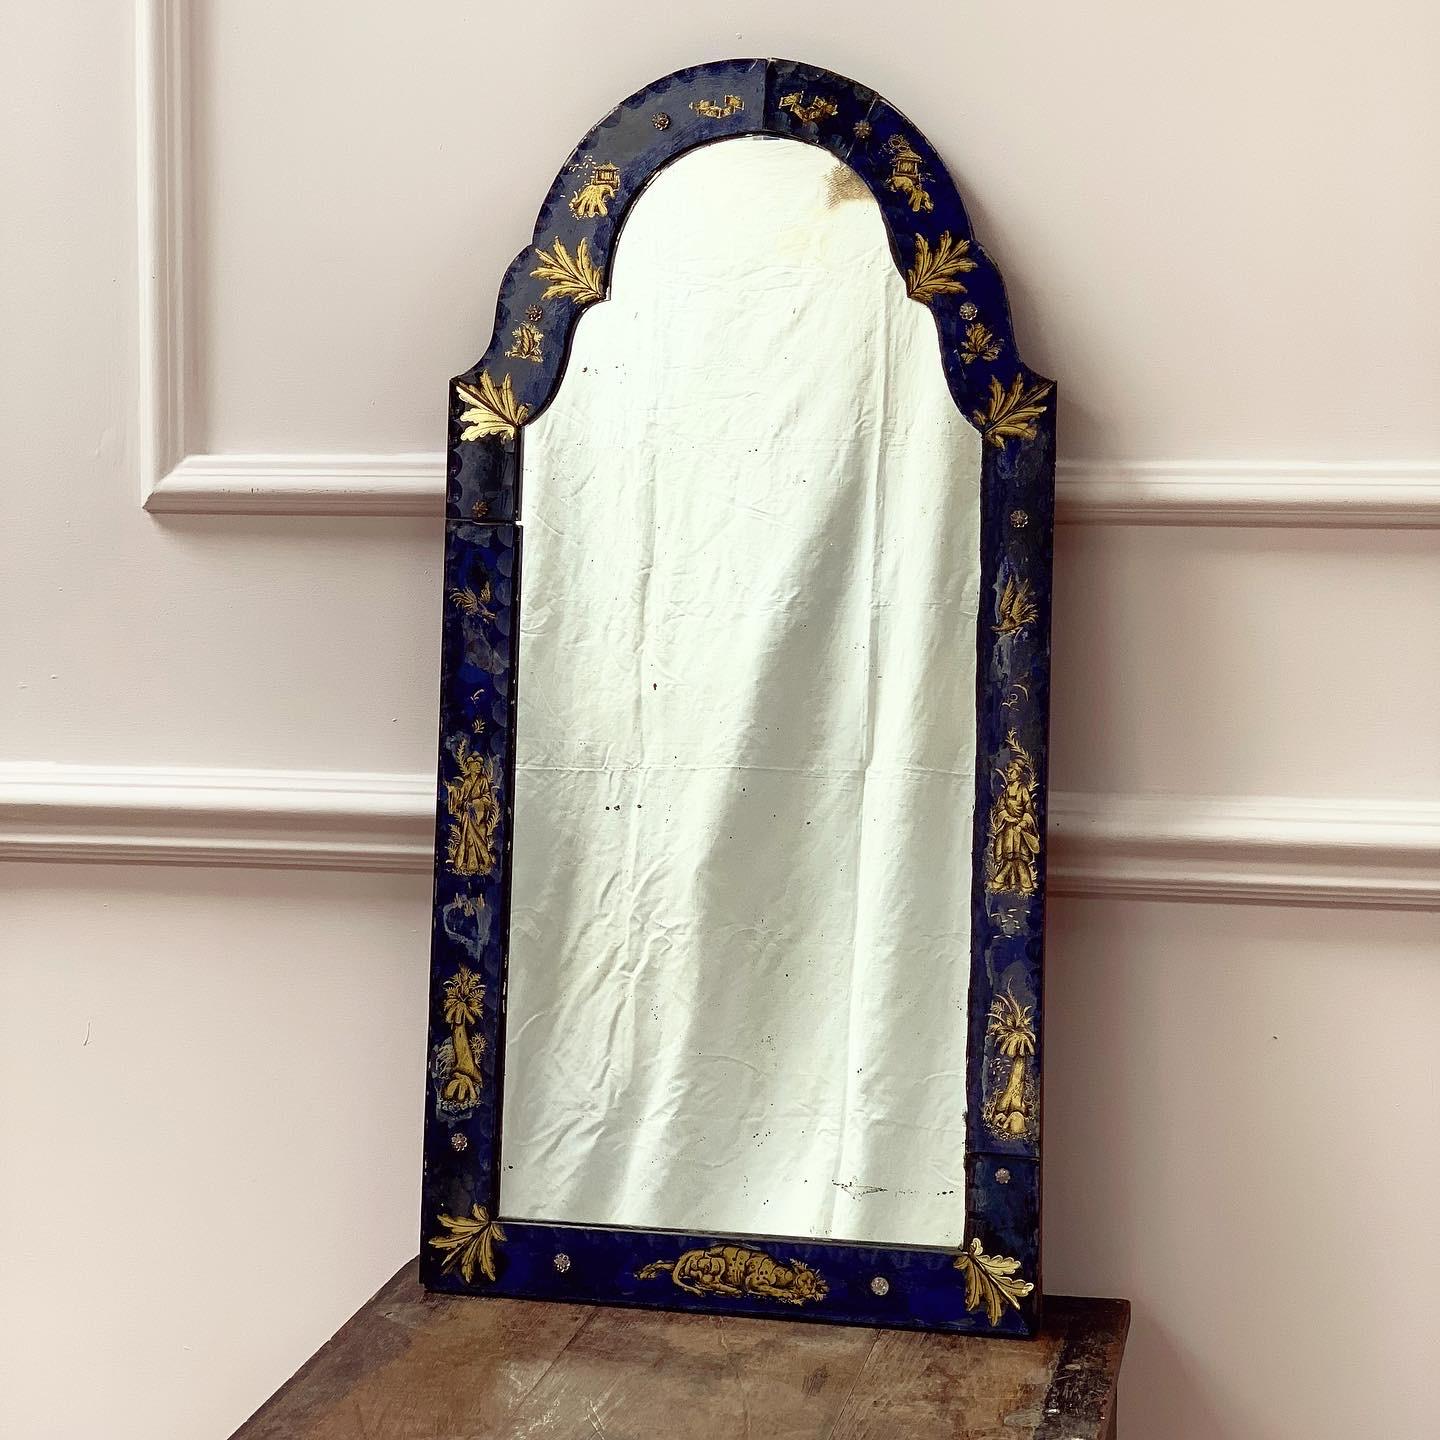 A George III verre eglomise pier mirror with arched mirror plate in a glass frame depicting gilt chinoiserie female figures, animals and leaves on a cobalt blue ground.